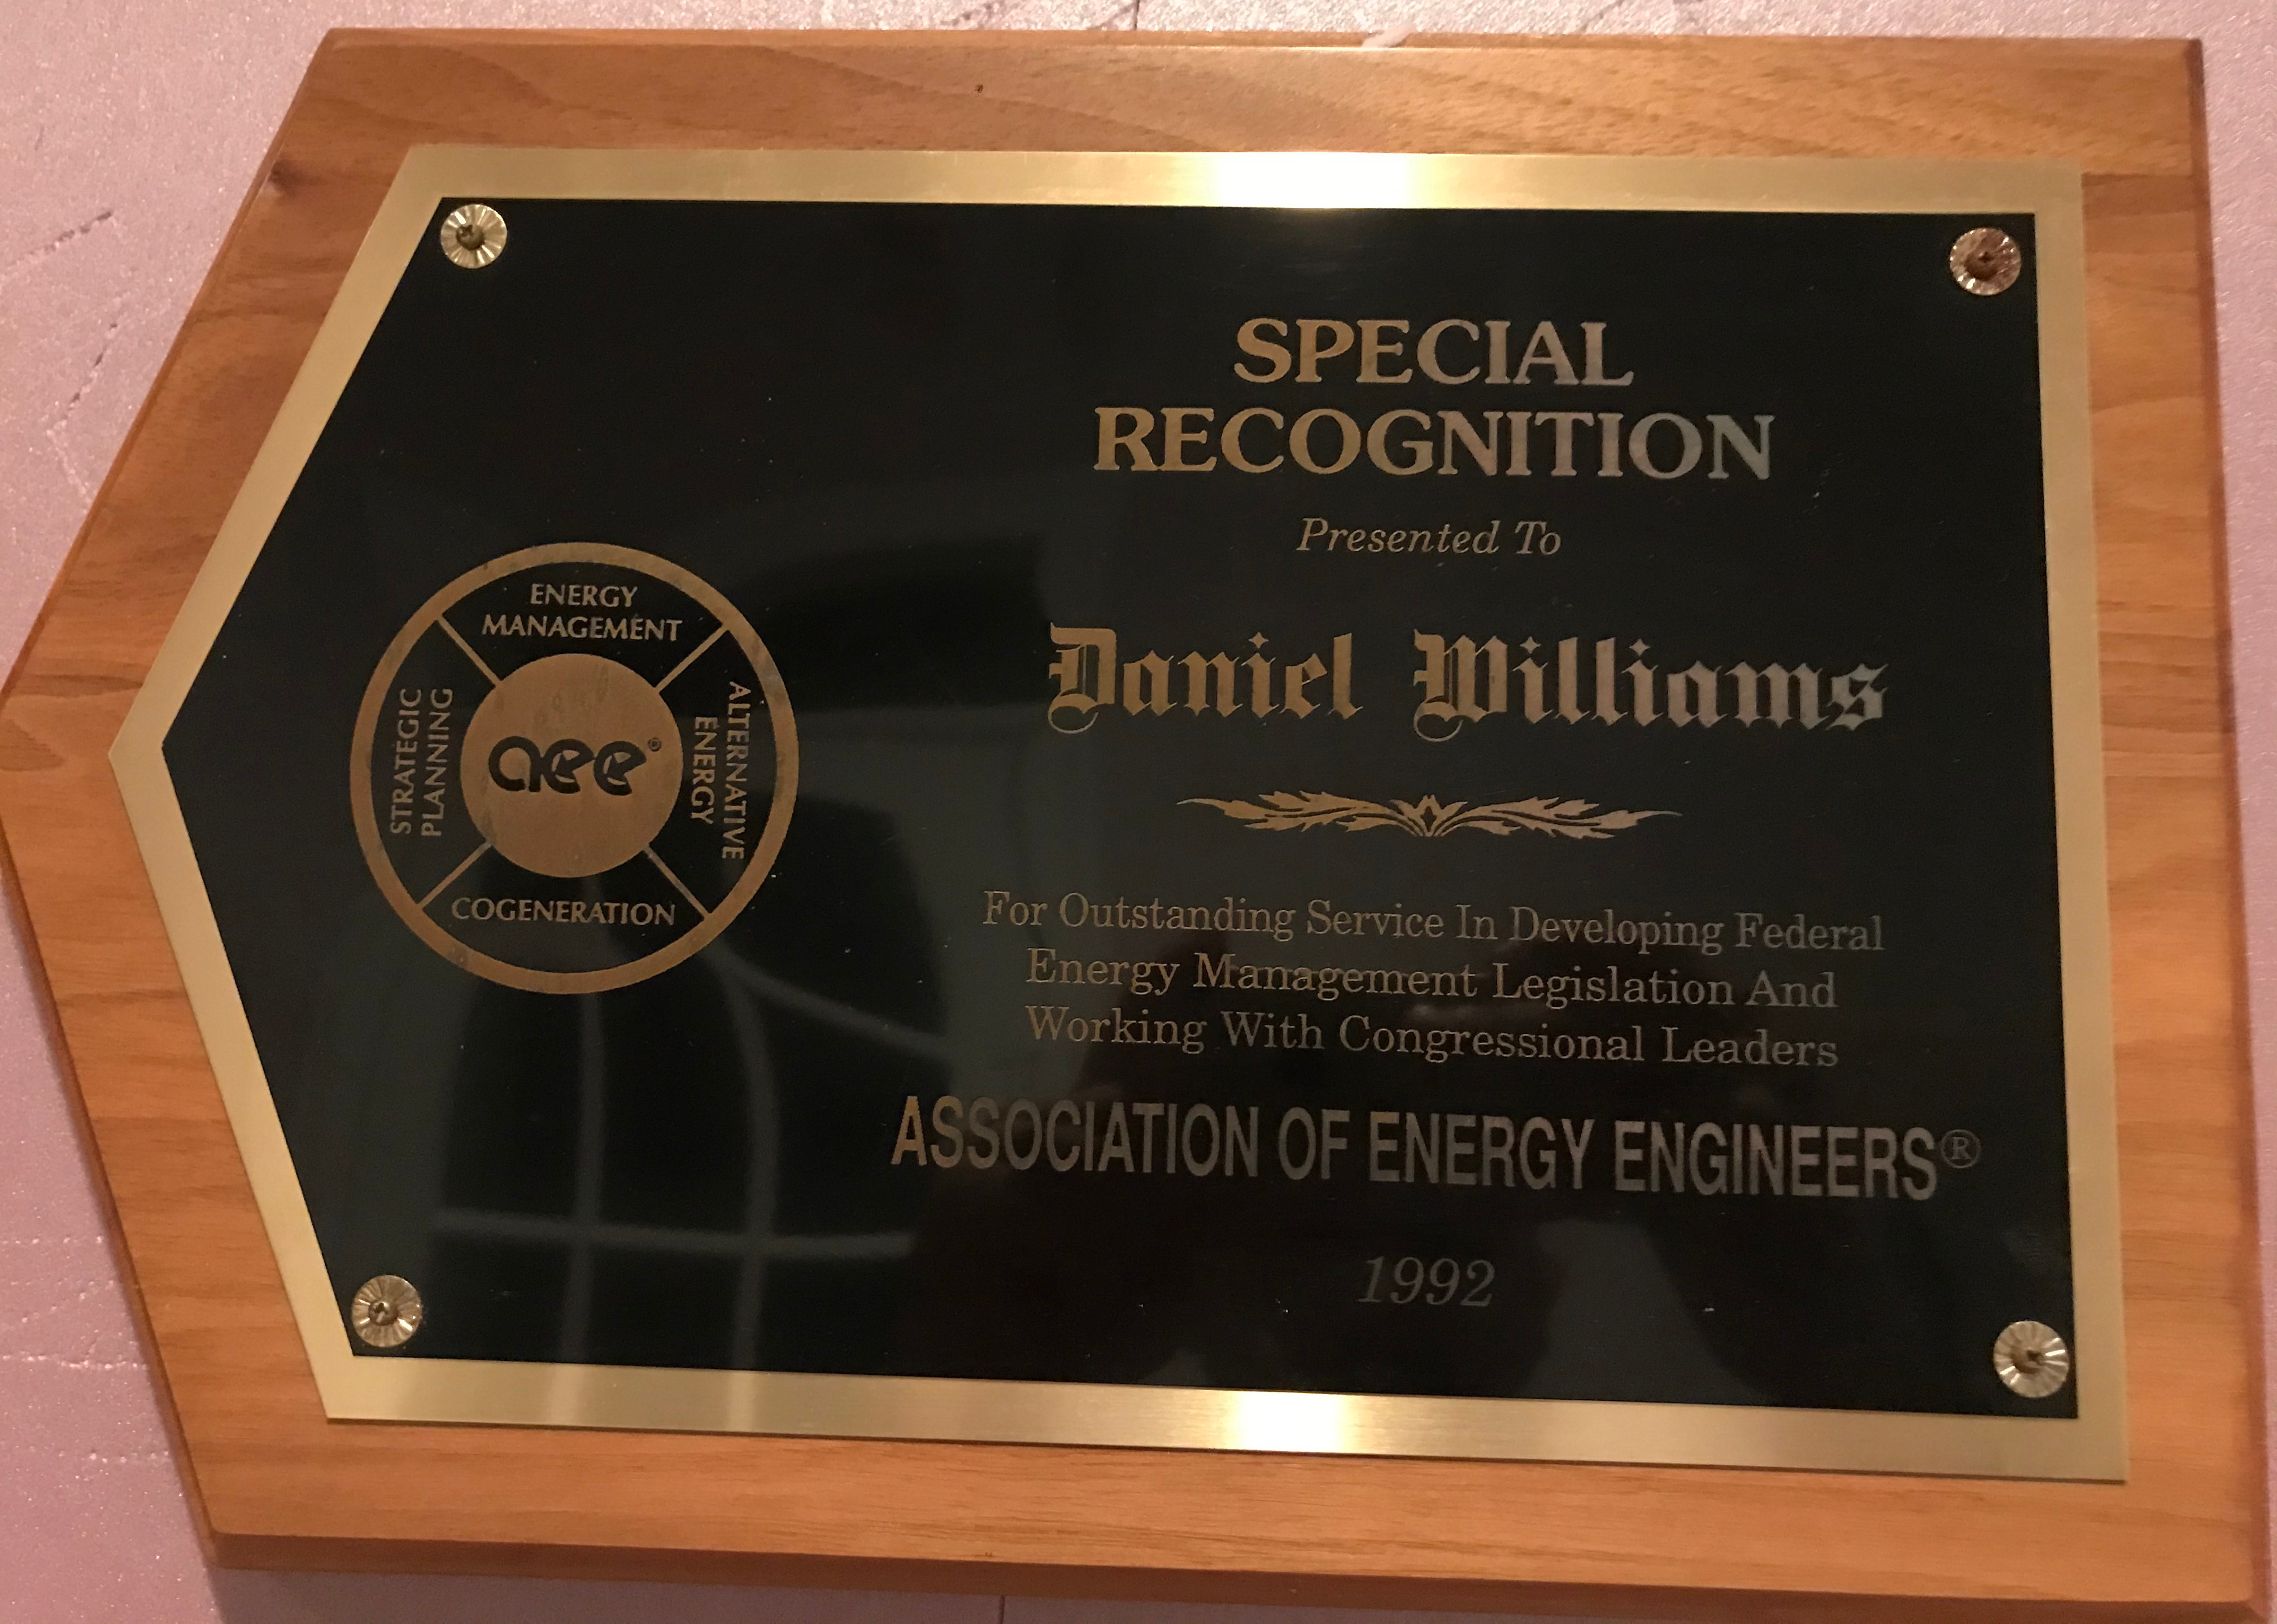 Special recognition and an international award from the Association of Energy Engineers in 1992